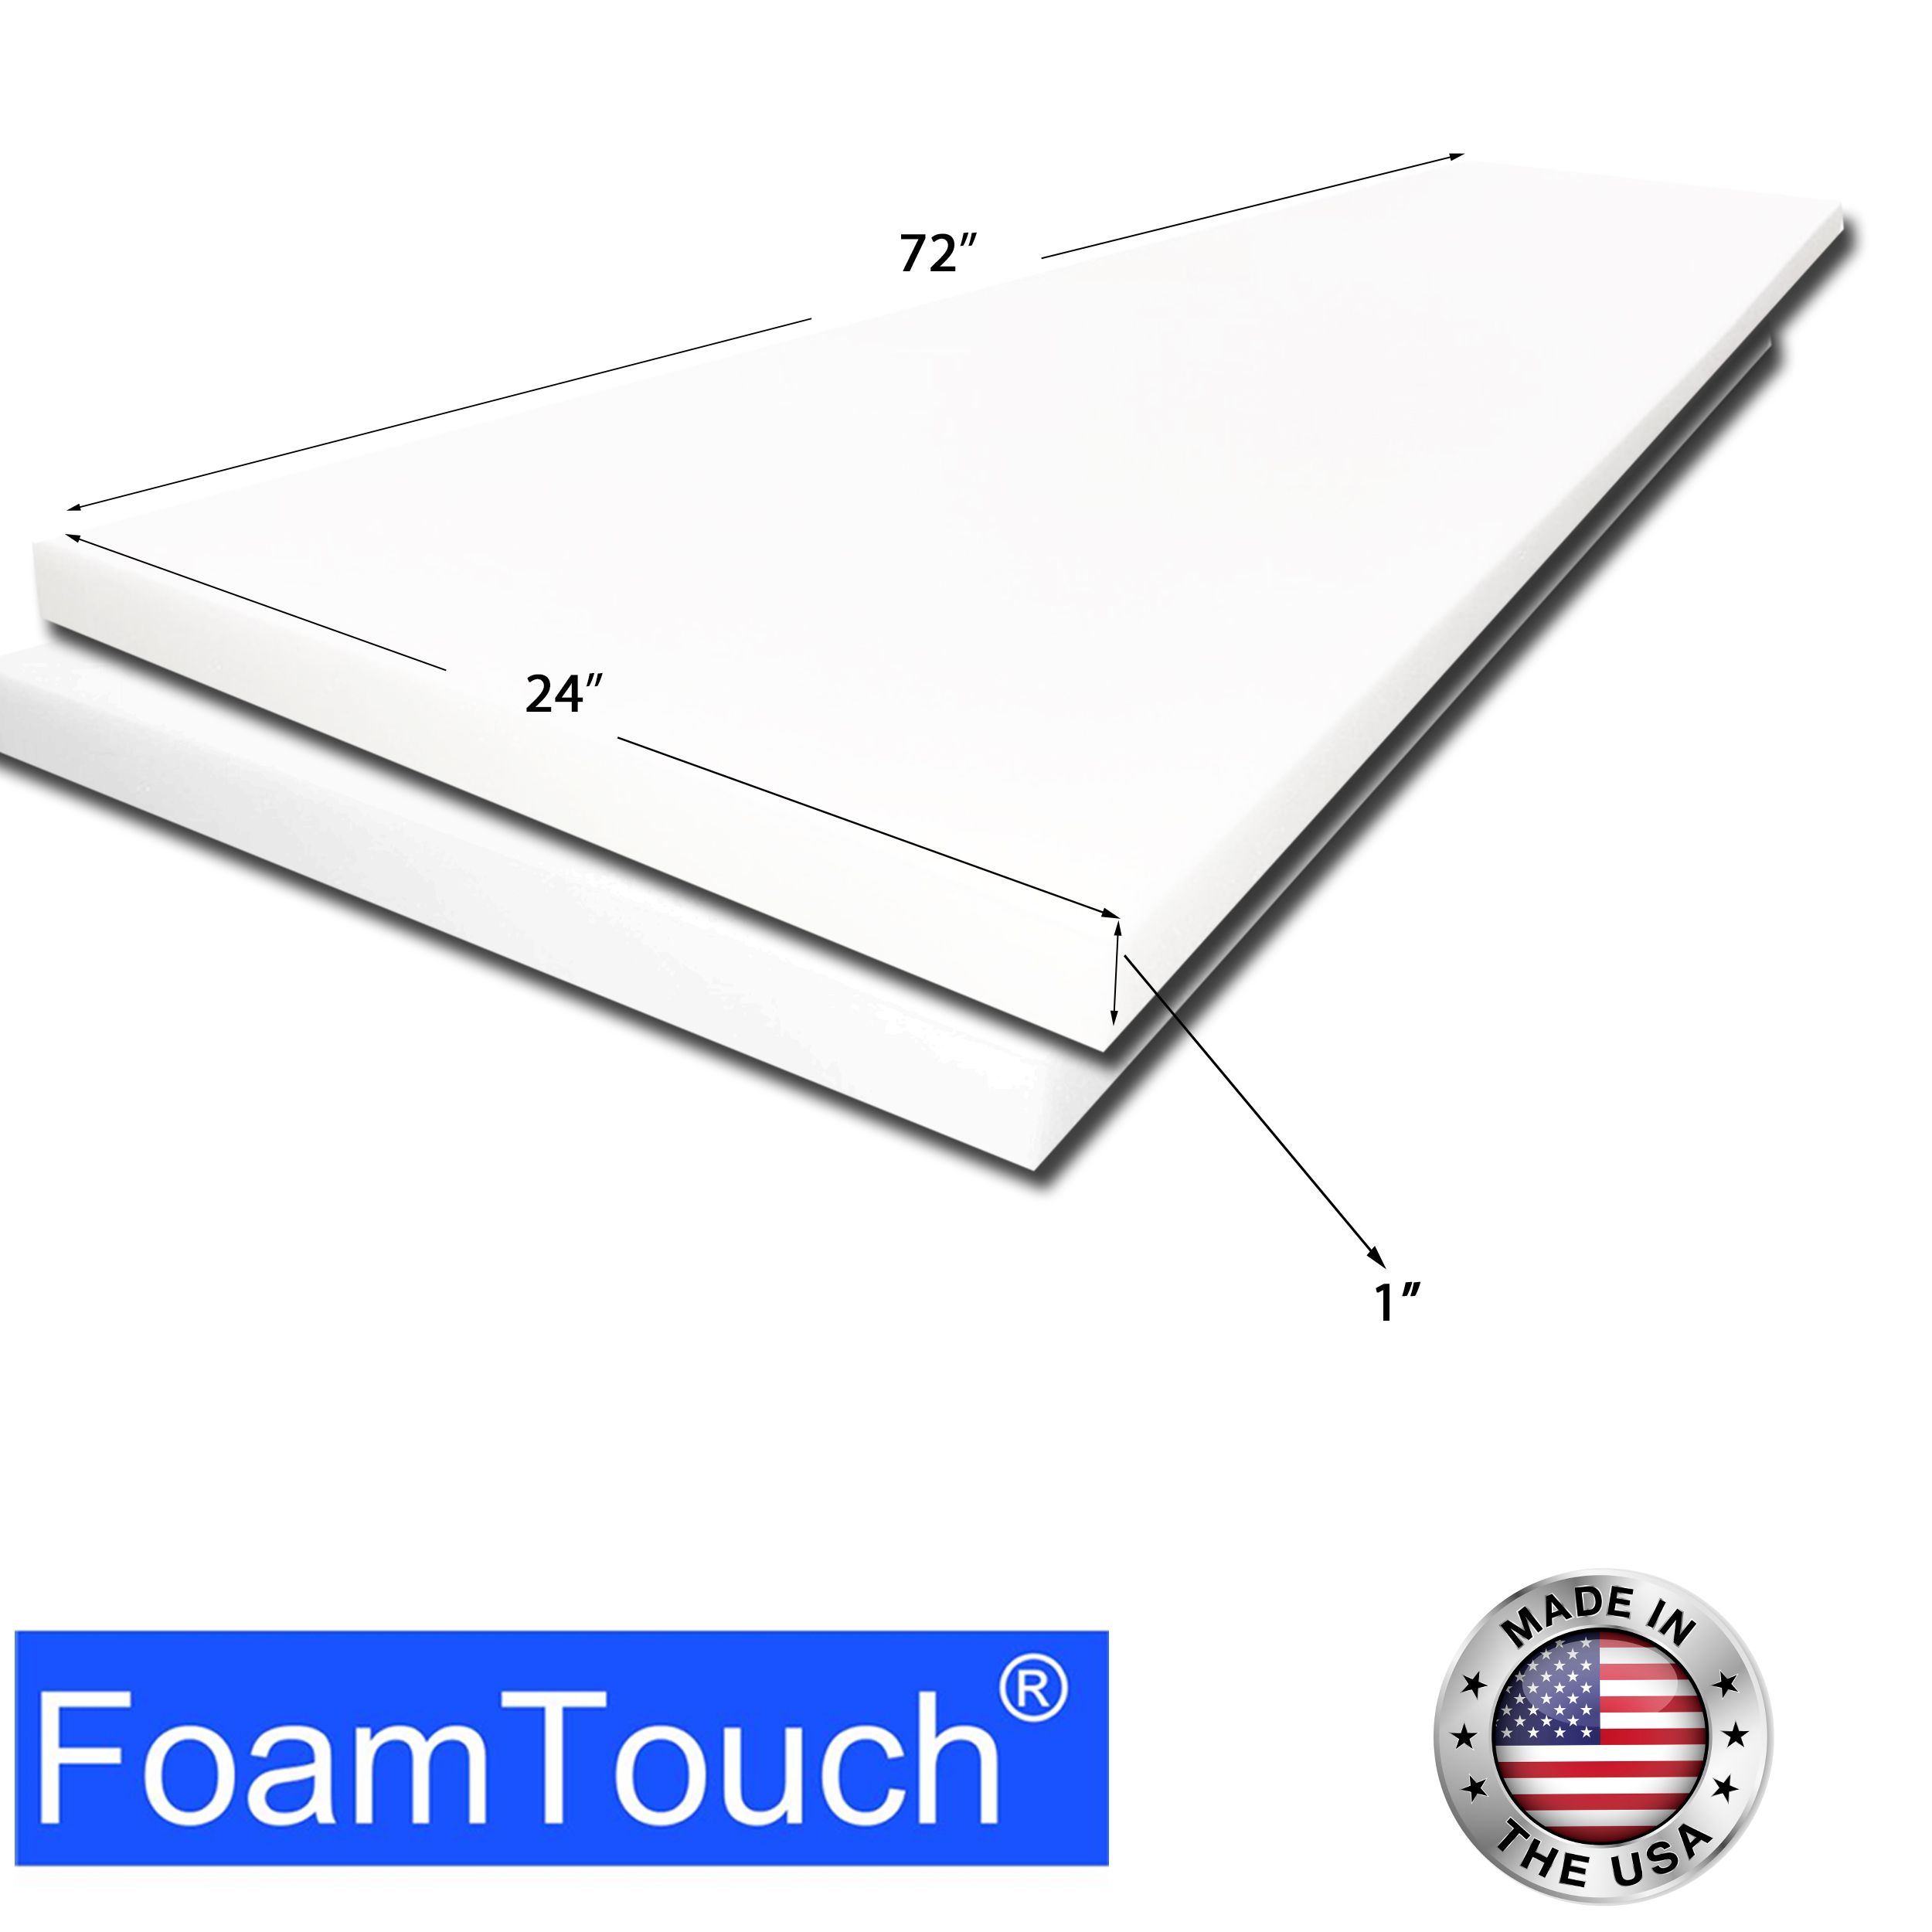 FoamTouch High Density 1 inch Height, 24 inches Width, 24 inches